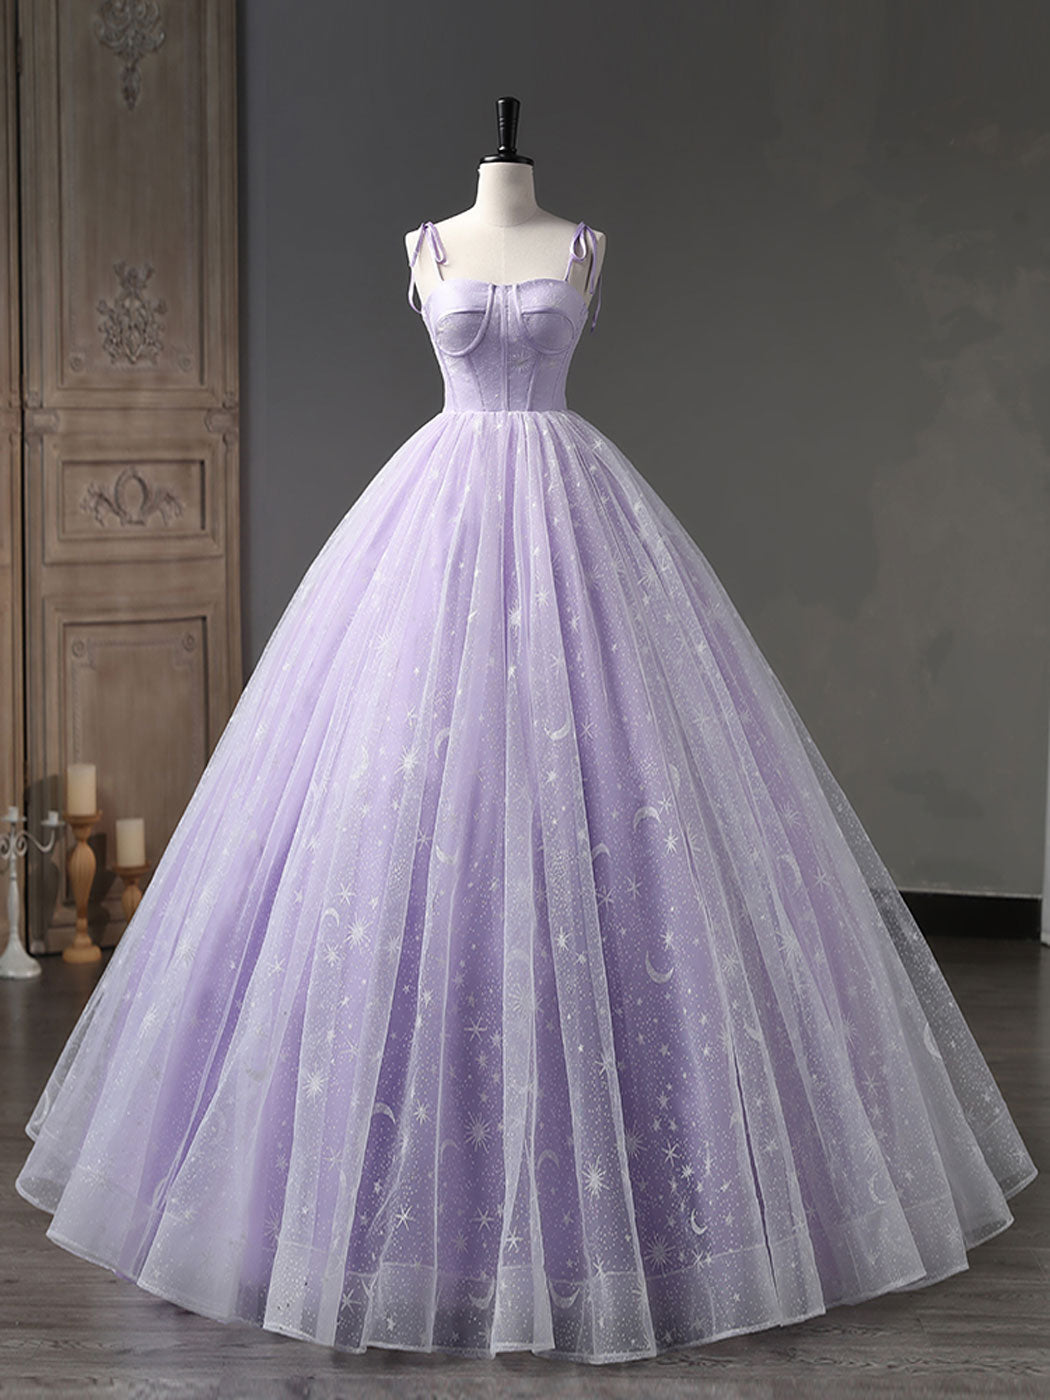 Lilac Ball Gown Corset Prom Dress Quinceanera Dress - DollyGown